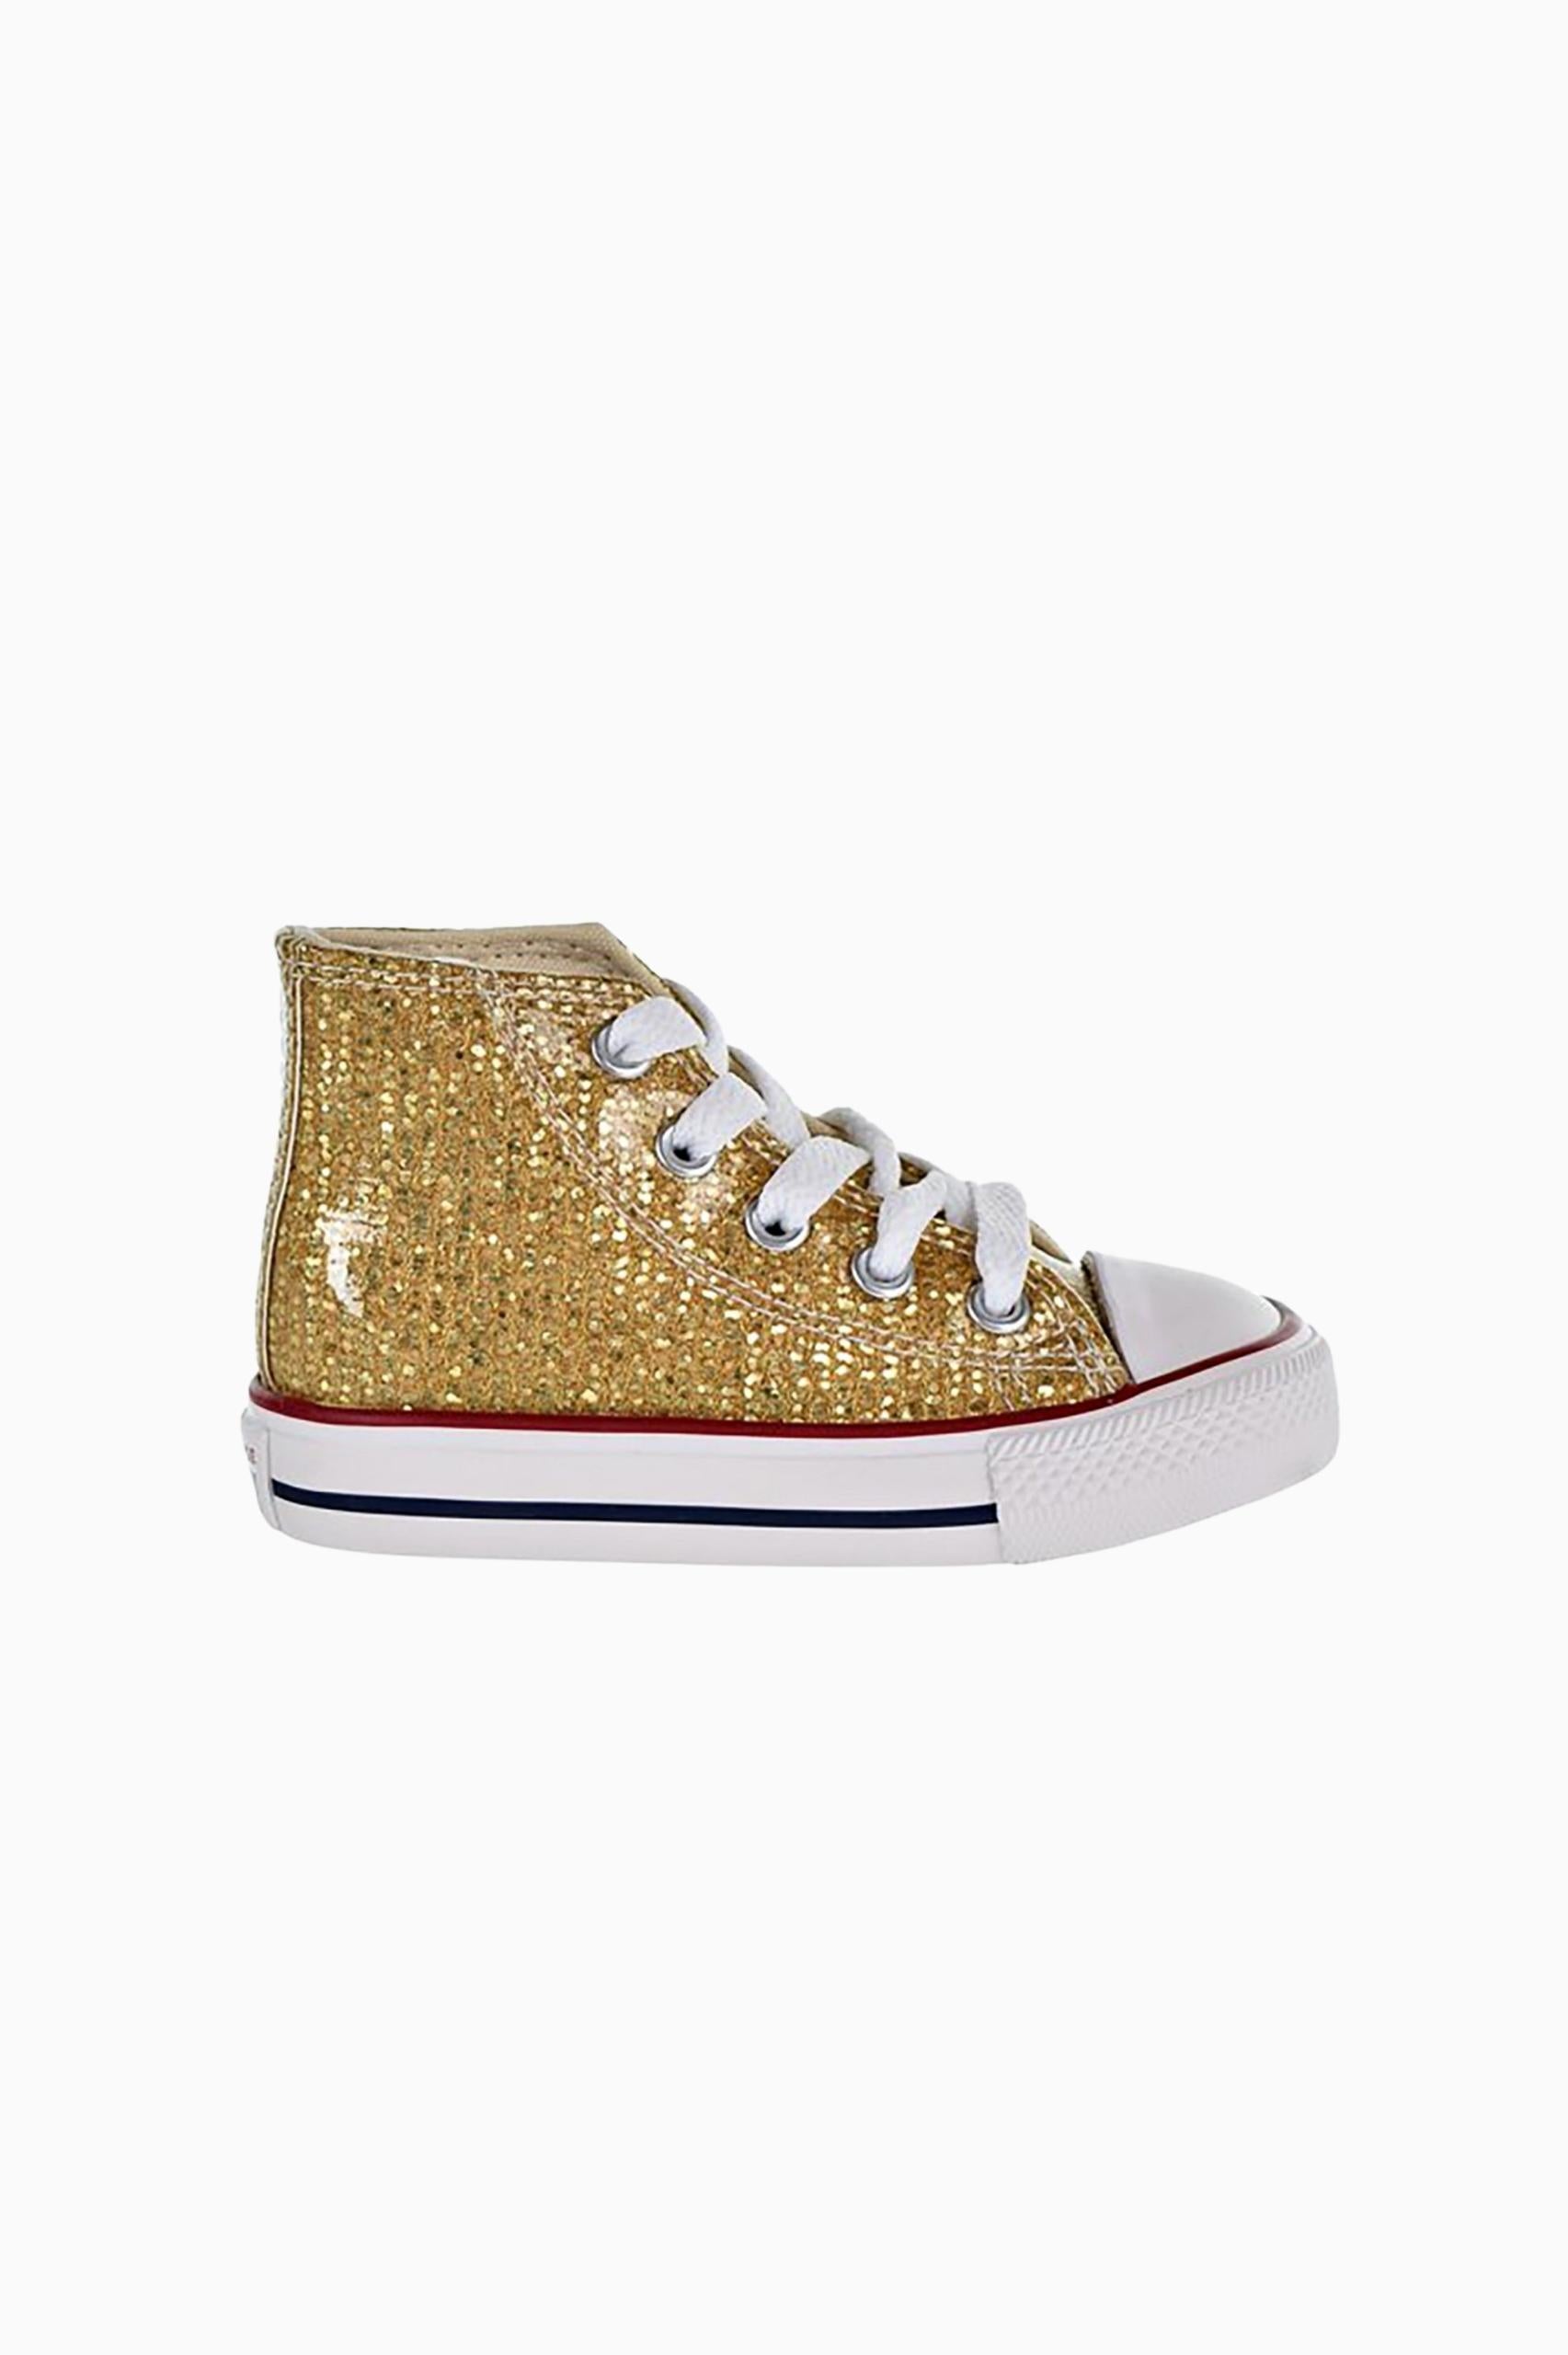 Converse Toddler's Chuck Taylor All Star Sparkle - Gold